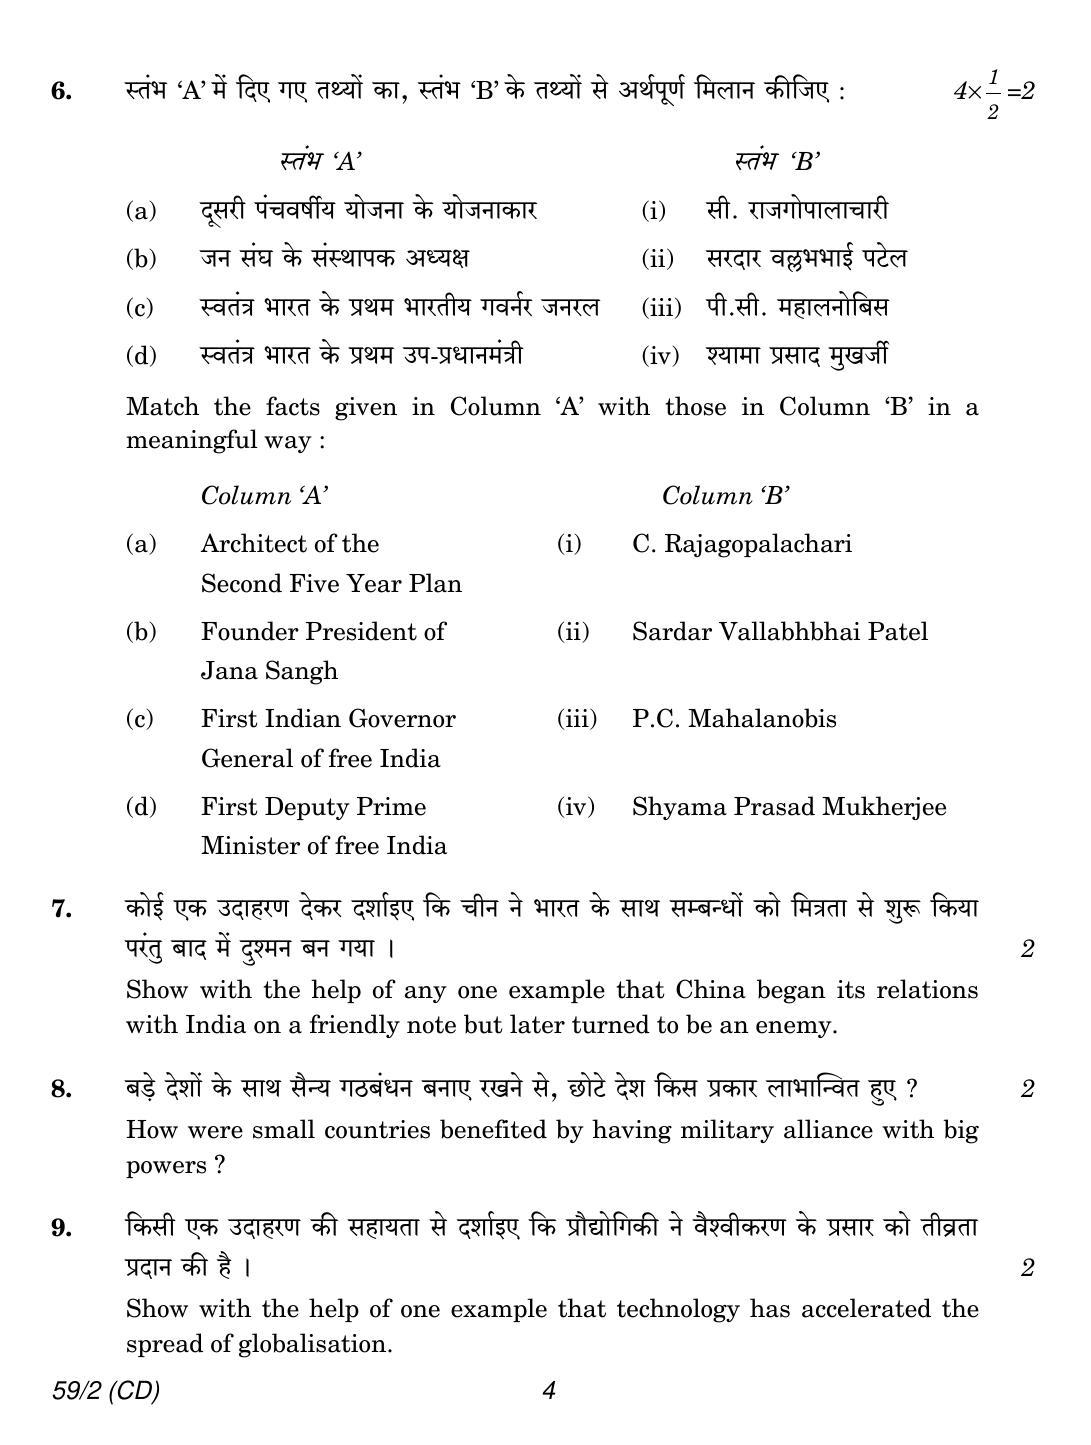 CBSE Class 12 59-2 POLITICAL SCIENCE CD 2018 Question Paper - Page 4